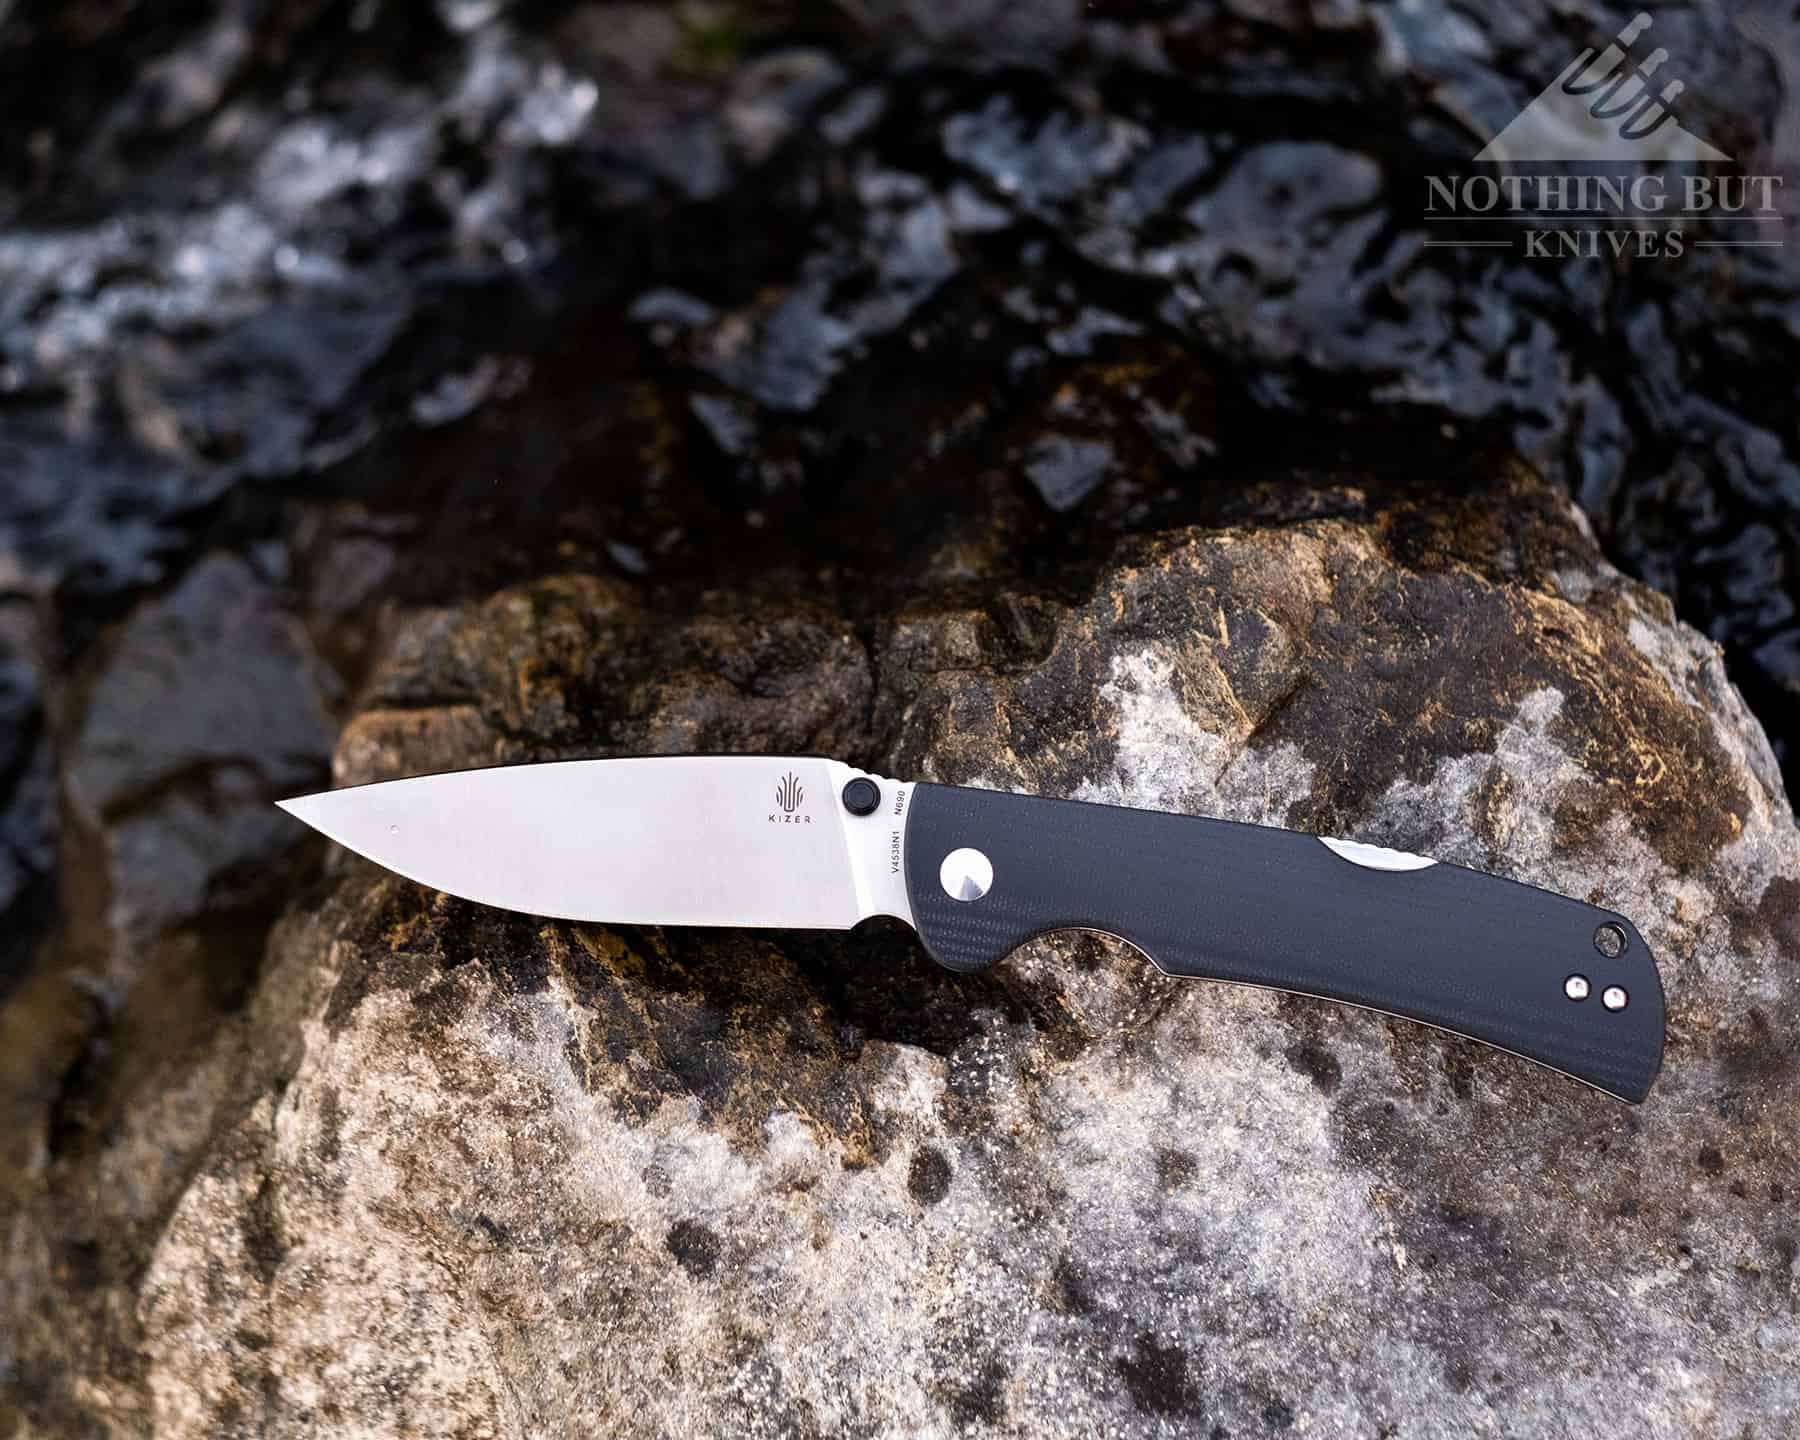 The Kizer Slicer Lockback folding knife is a great hard use knife with a strong lock. It is shown here on a rock next to a creek. 